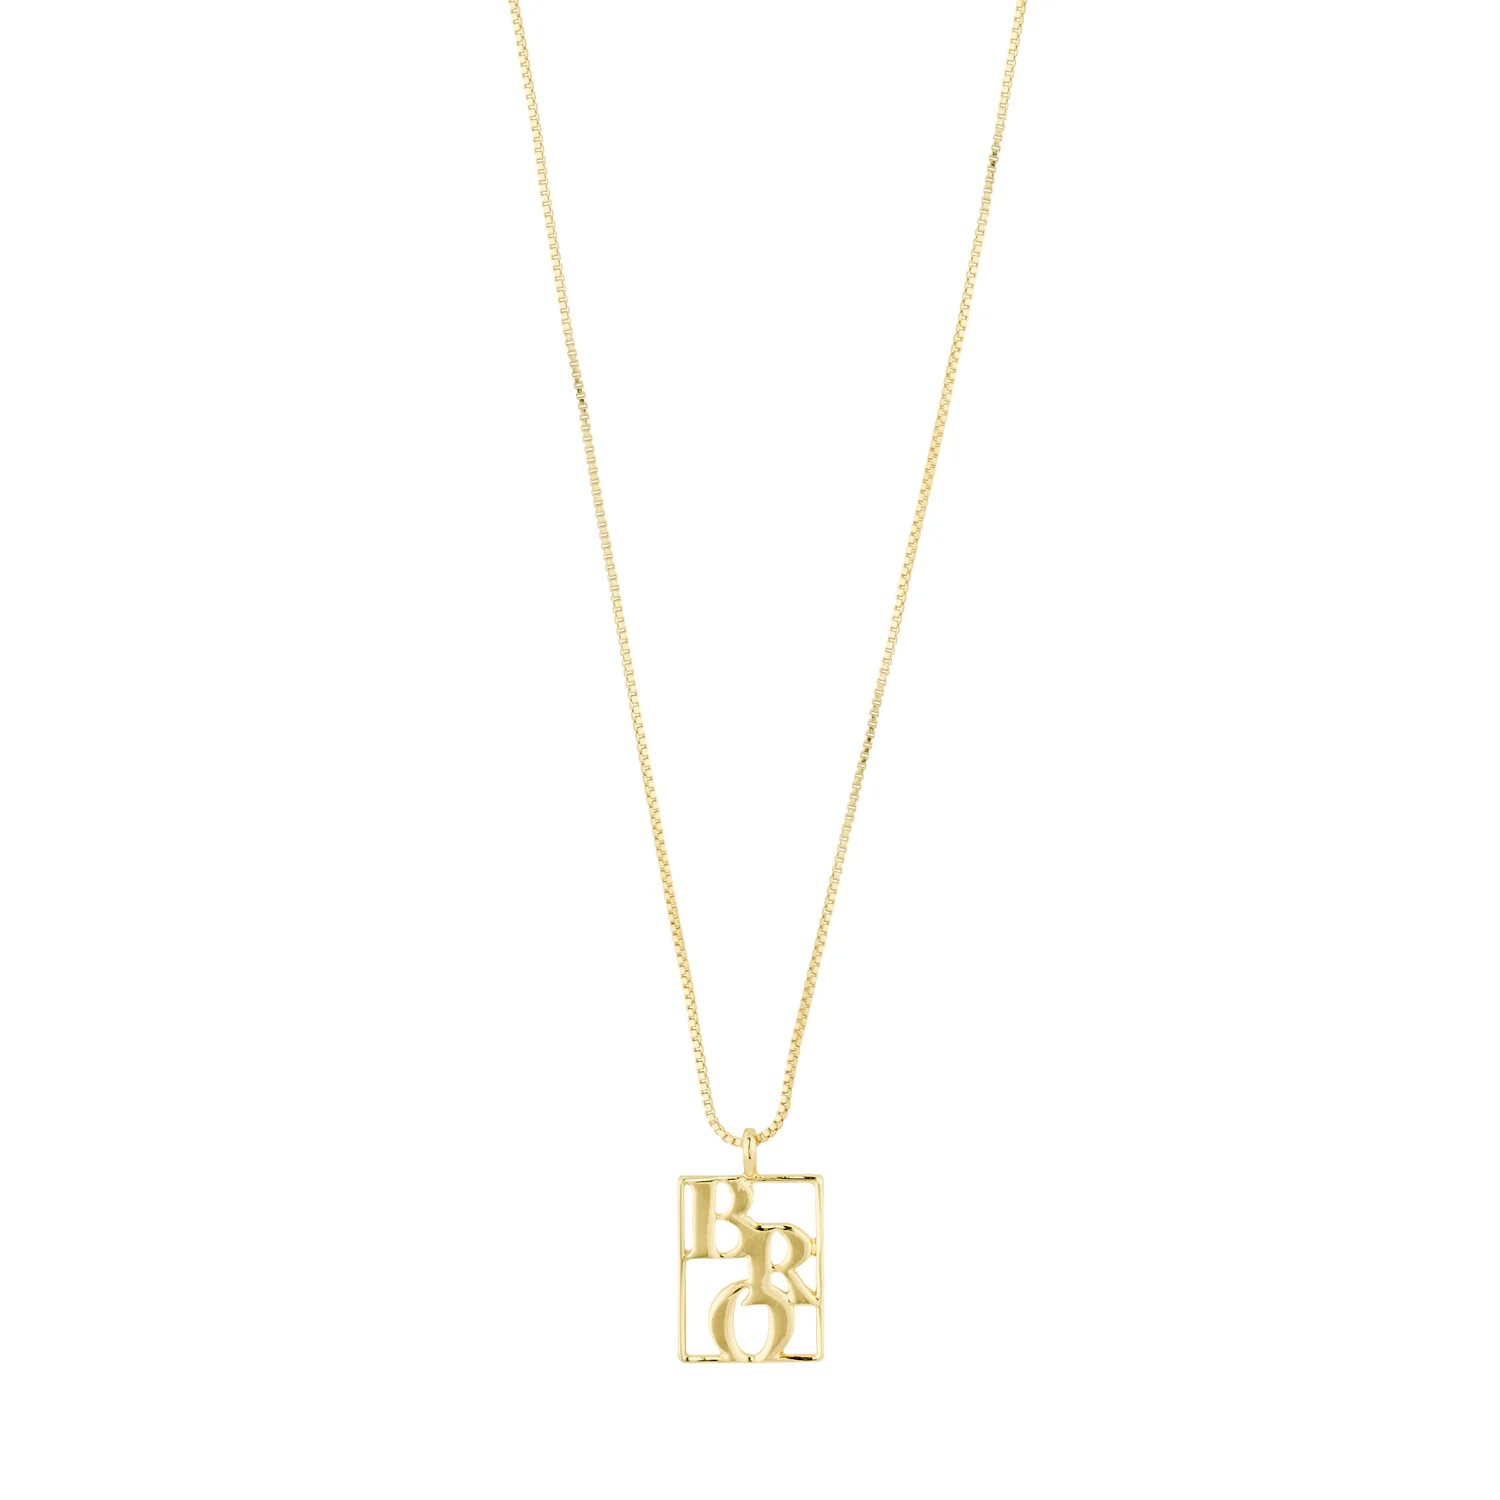 Pilgrim BRO Love Tag Necklace - Gold Accessories - Jewelry - Necklaces by Pilgrim | Grace the Boutique